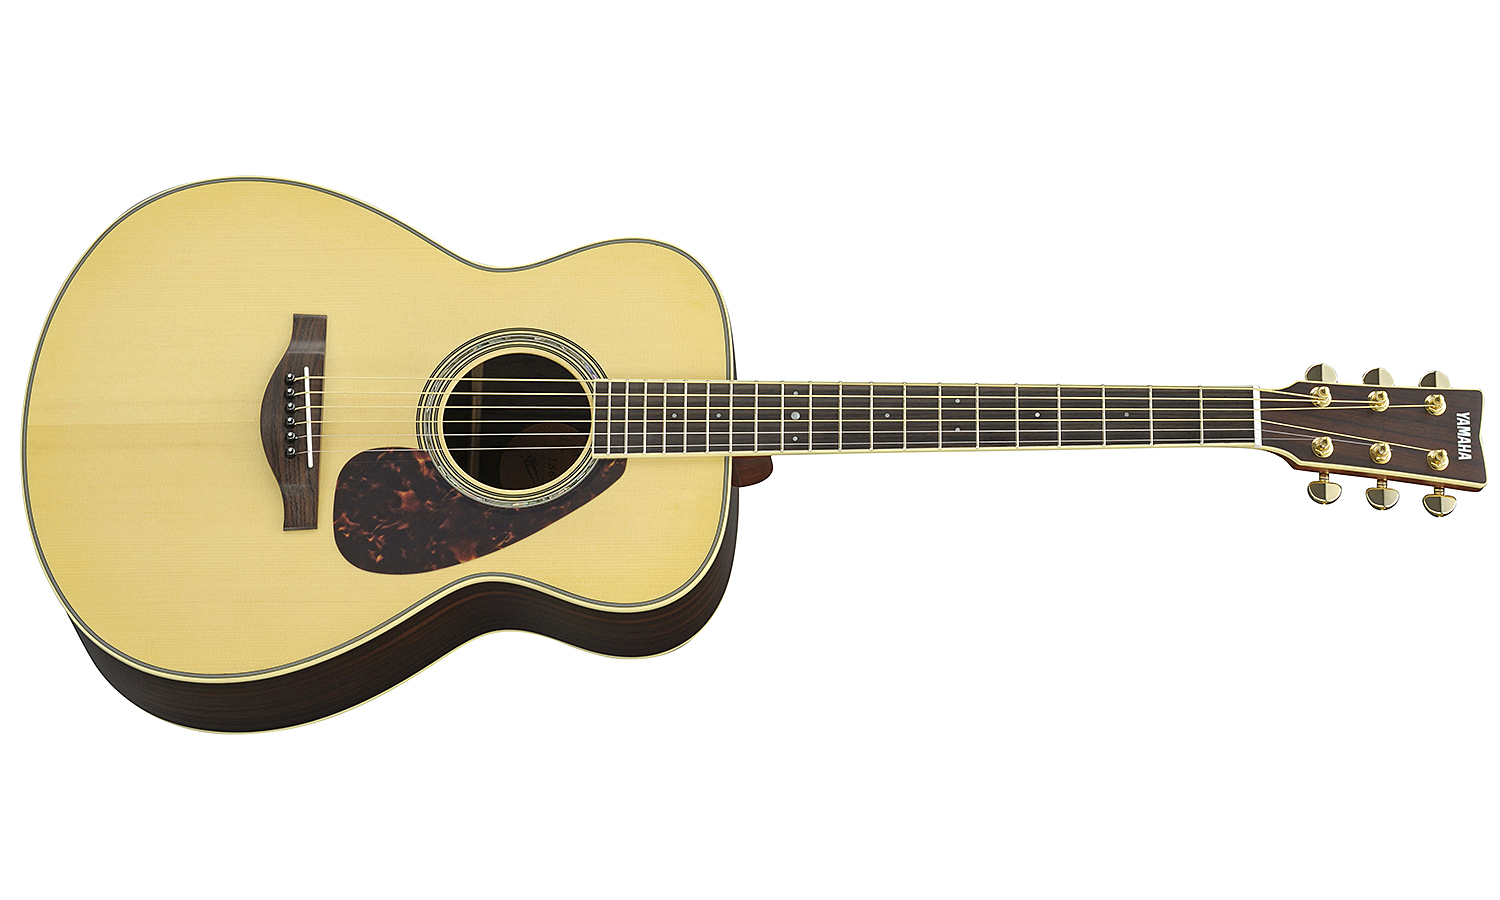 Yamaha Ls6 Are - Natural - Guitare Electro Acoustique - Variation 1